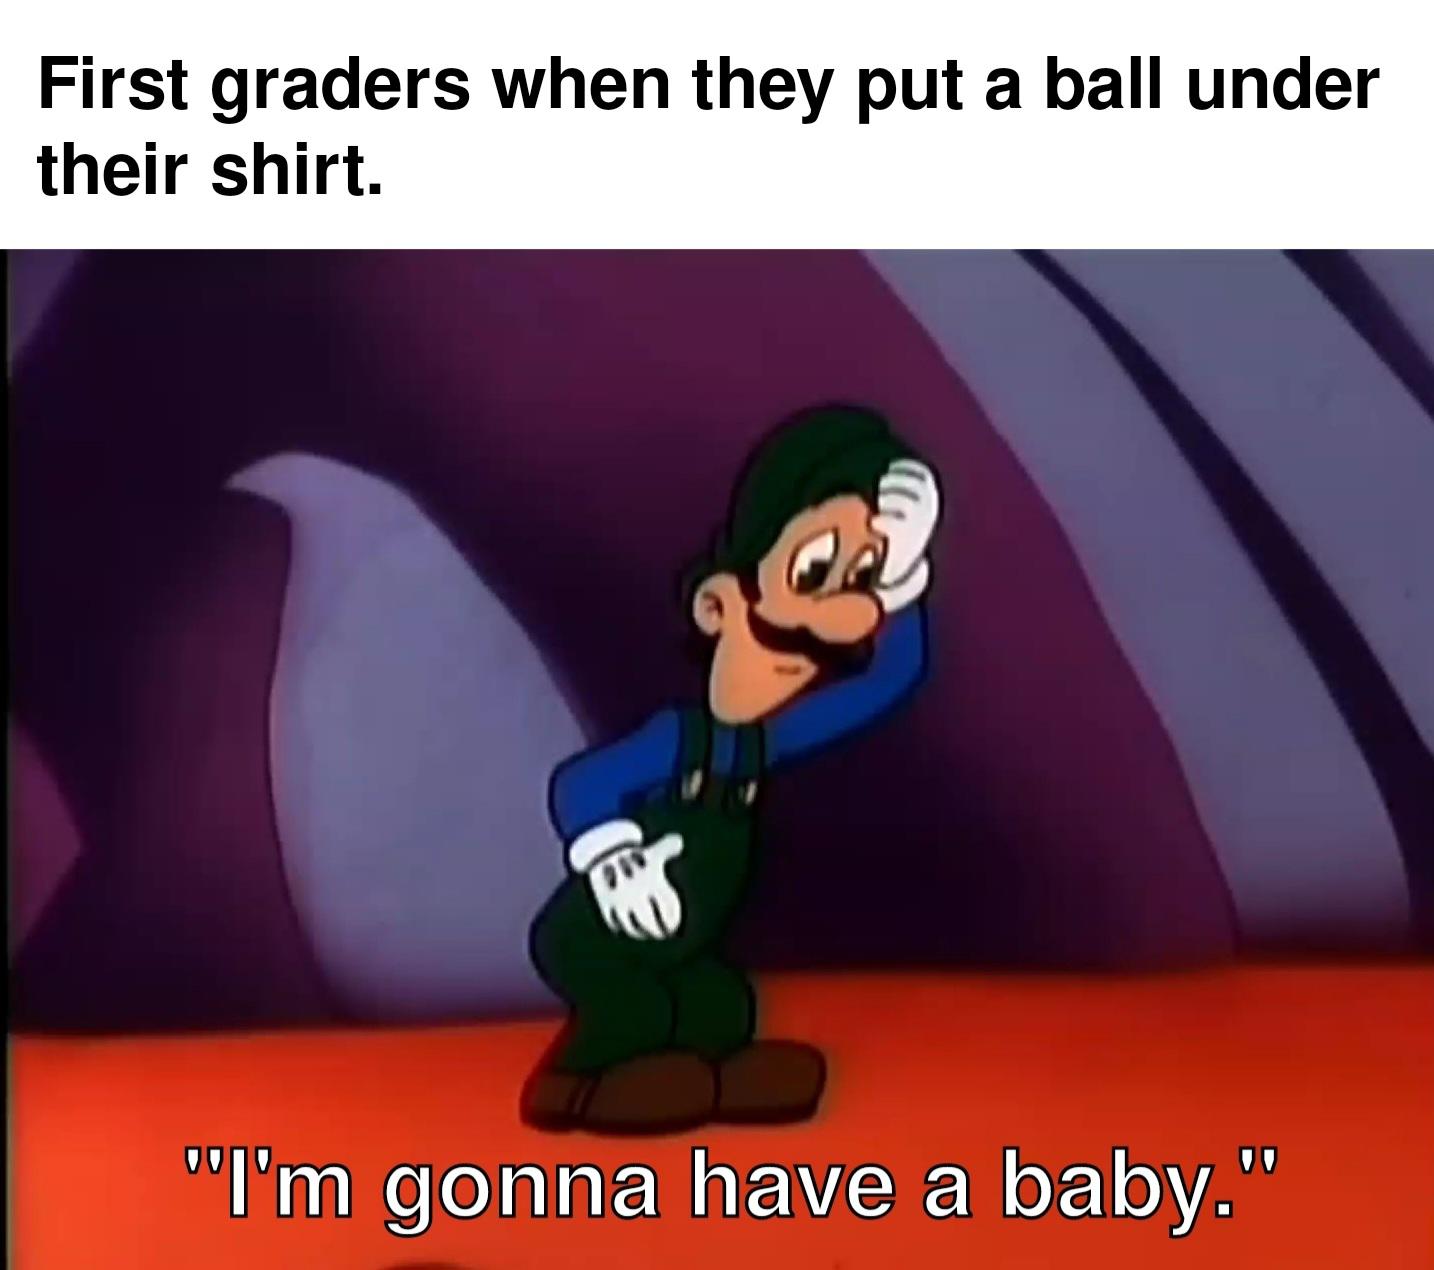 dank memes - luigi i m gonna have a baby - First graders when they put a ball under their shirt. "I'm gonna have a baby."